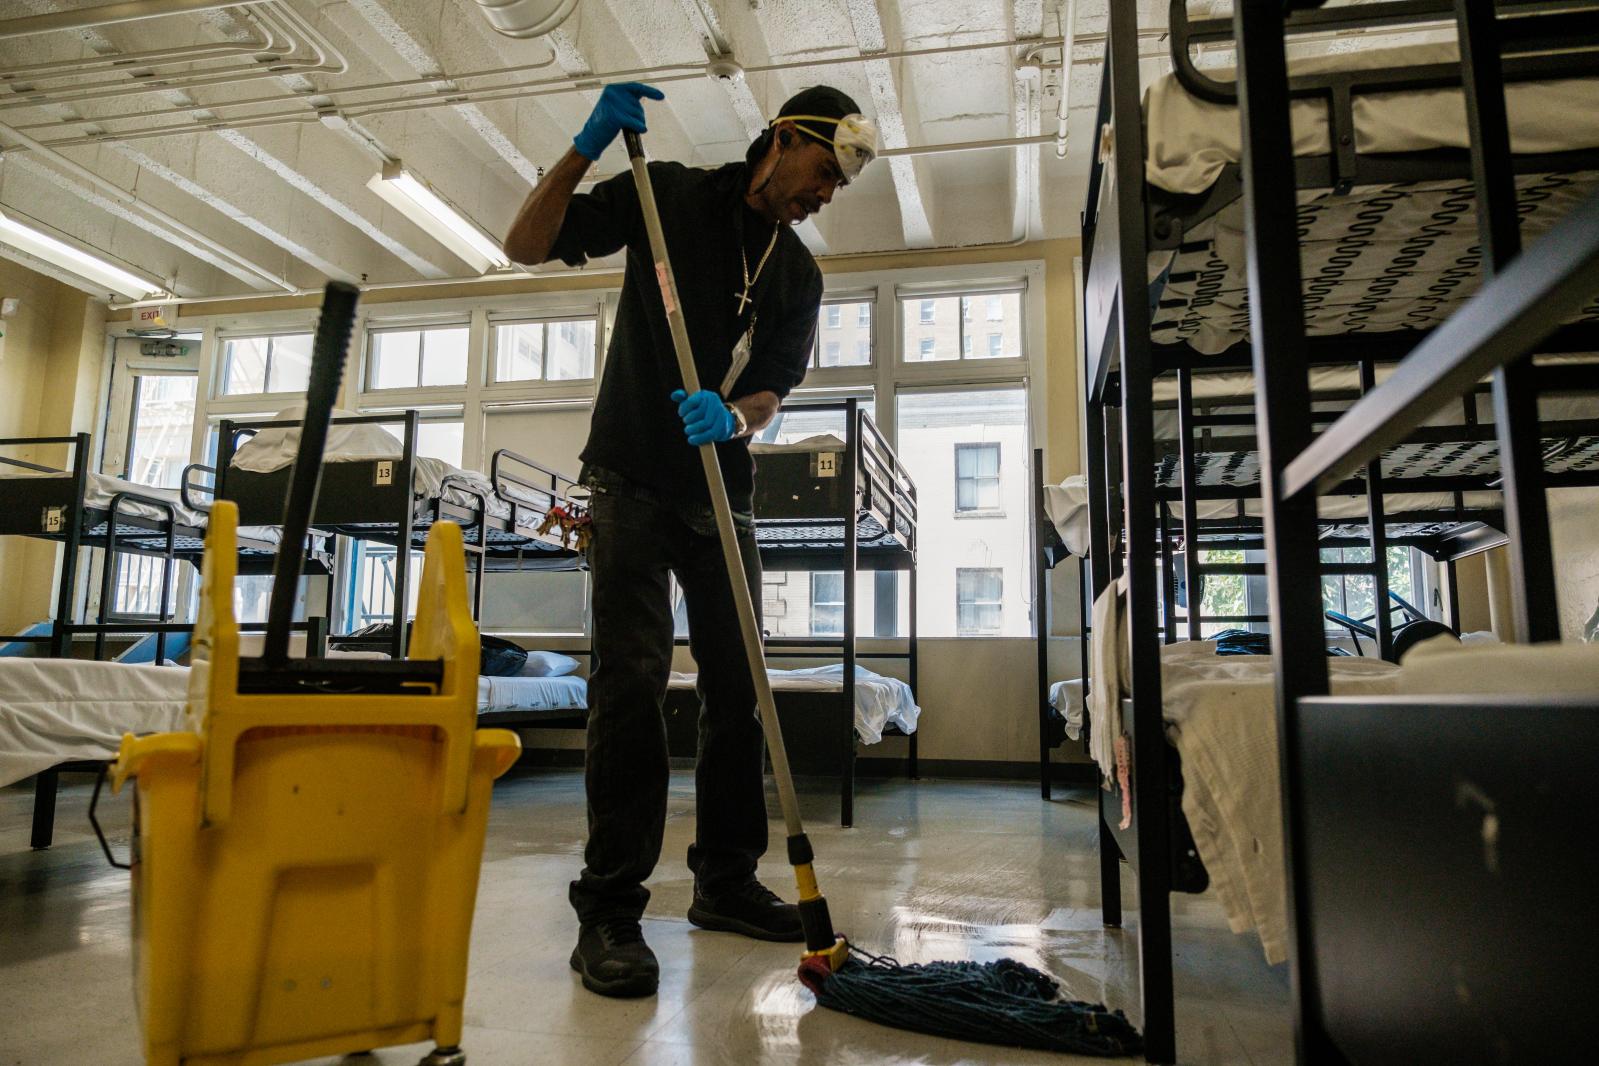 Image from San Francisco's Housing Crisis - Cliff Bonnet cleans the floors of the dormitory quarters...